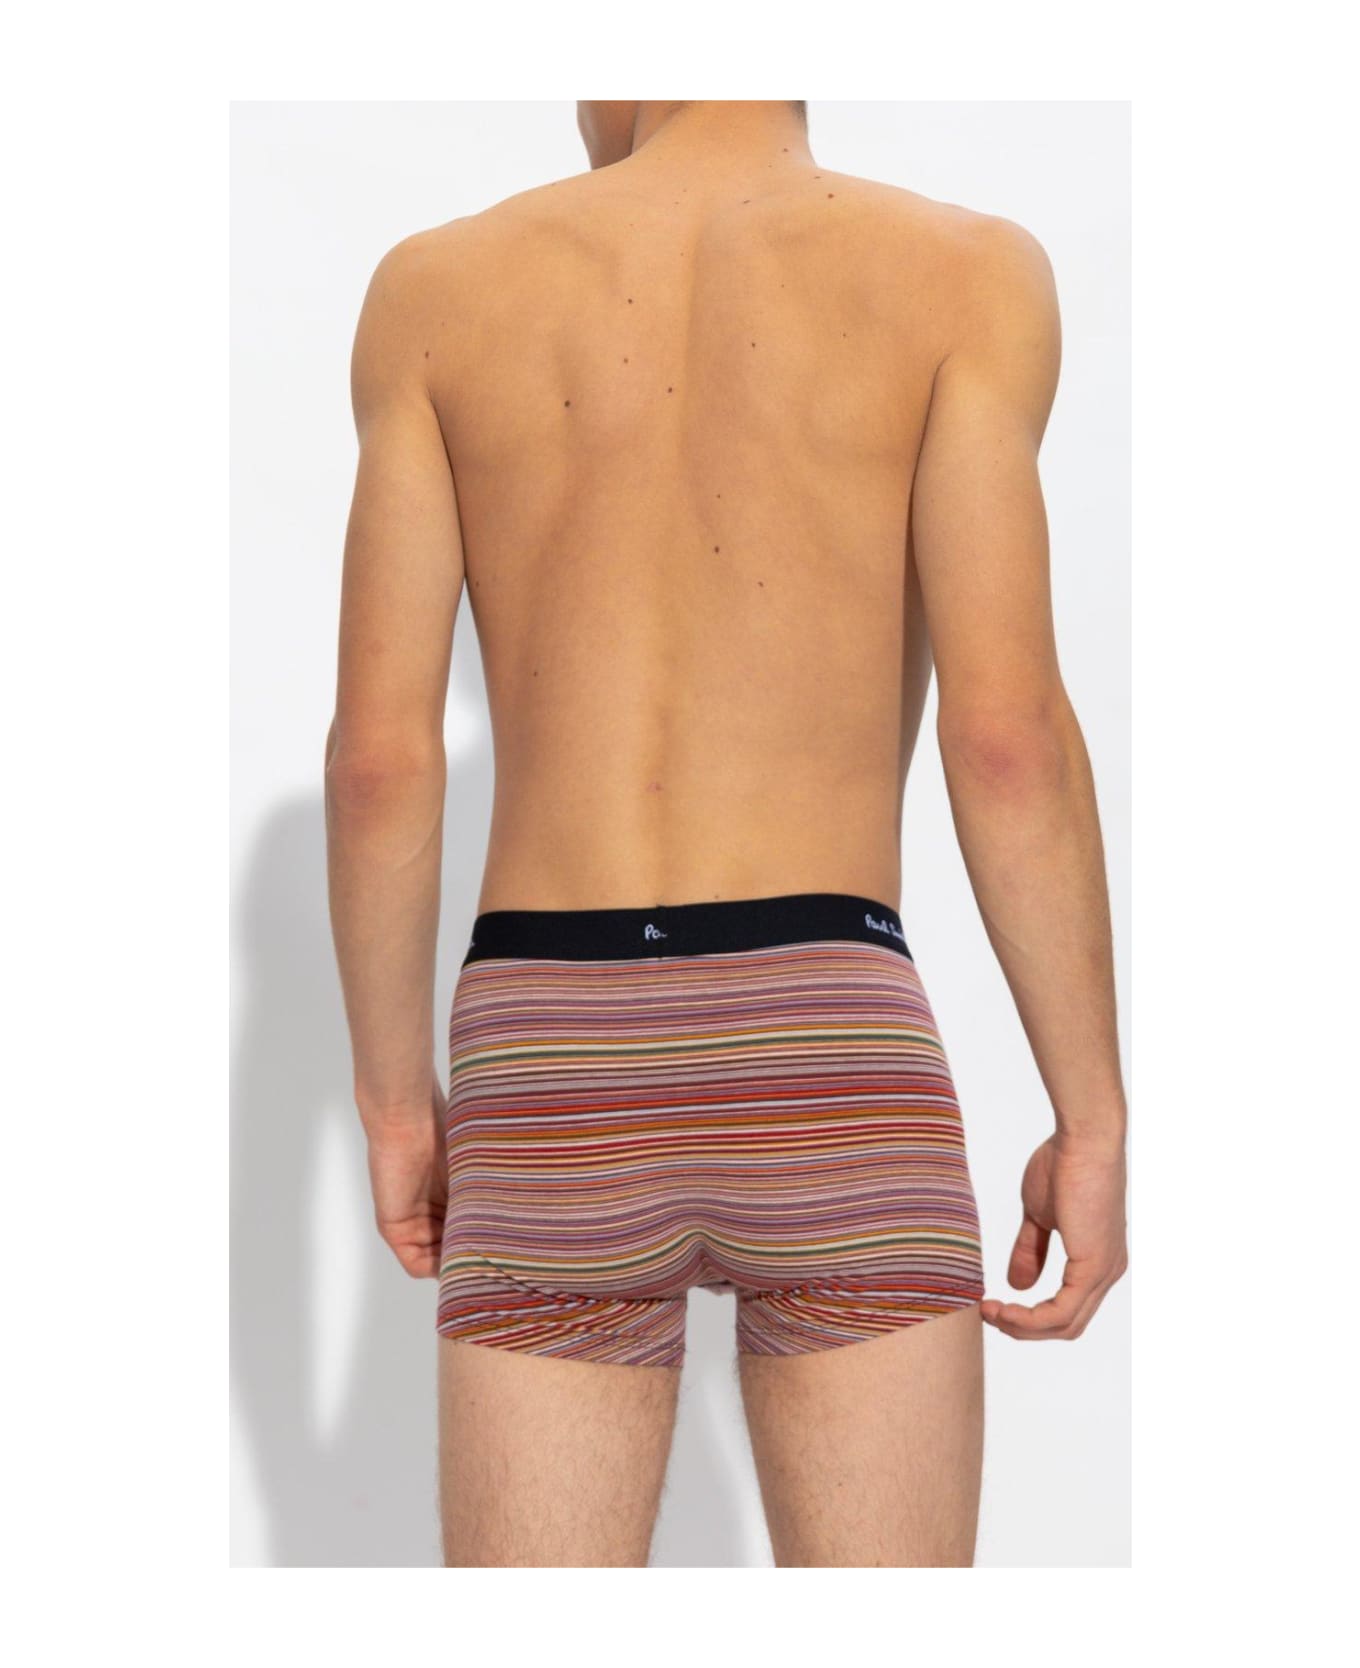 Paul Smith Branded Boxers 3 Pack - MULTICOLOR